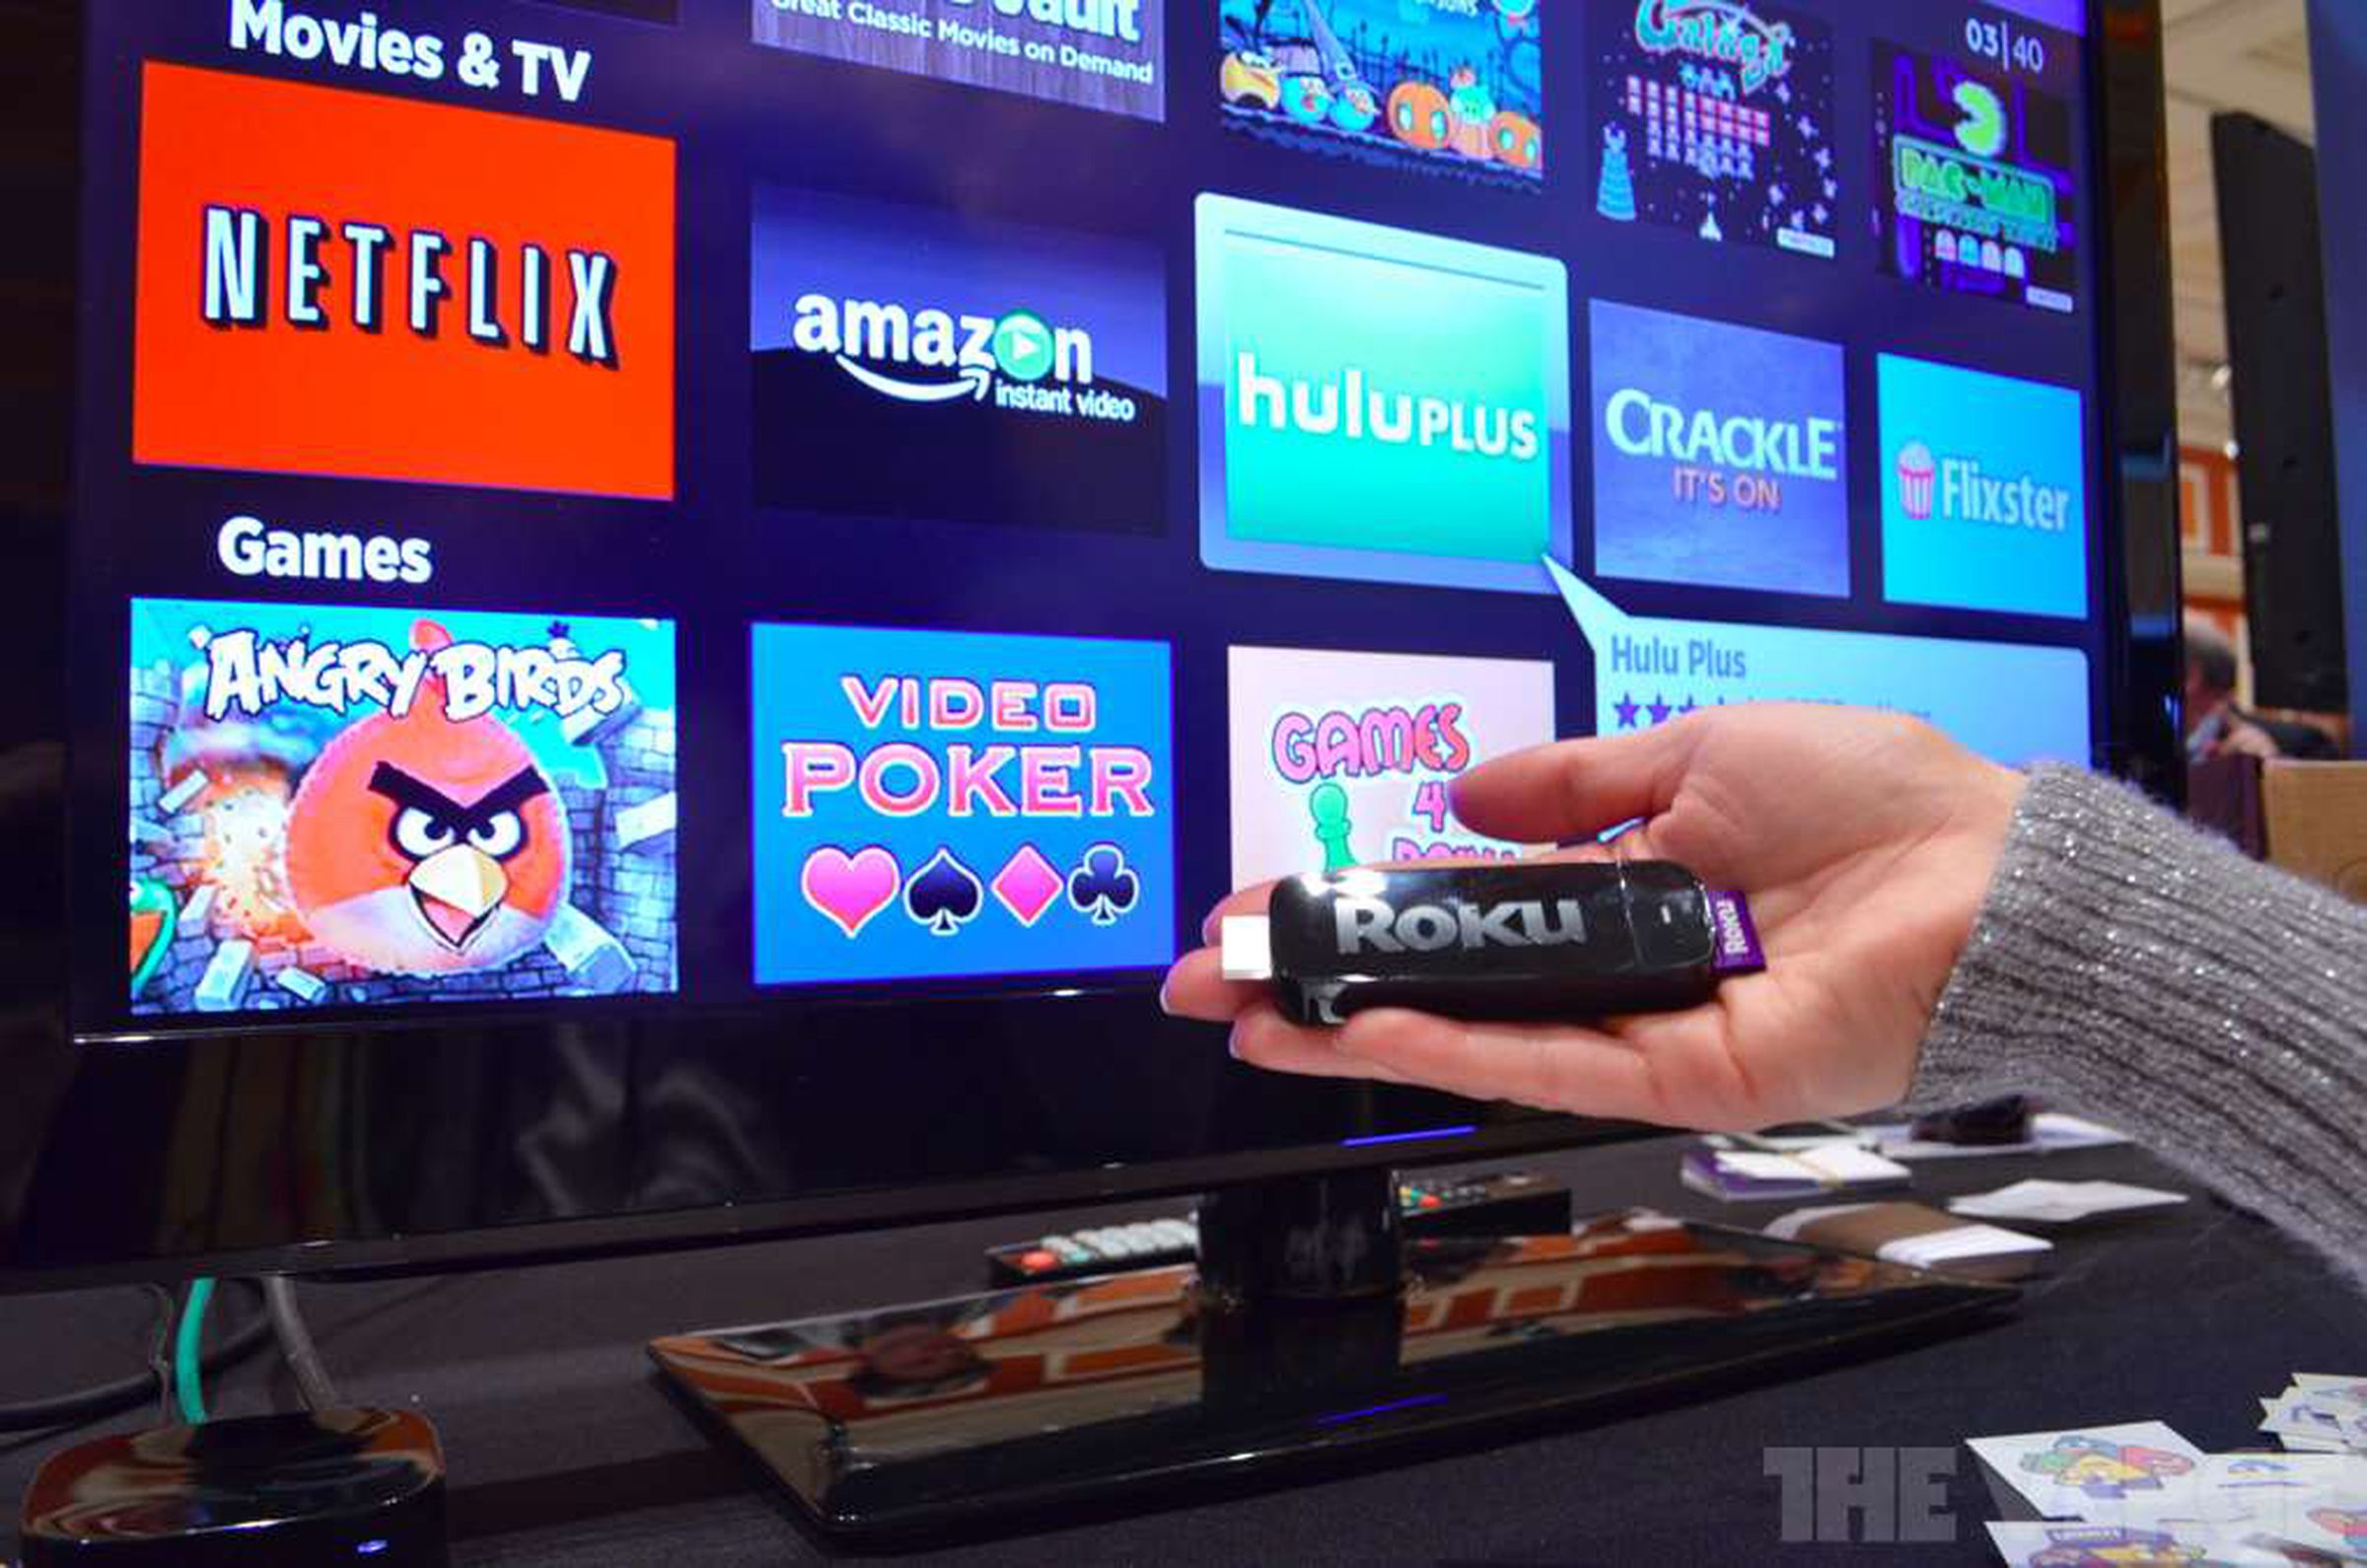 Roku Streaming Stick hands-on pictures 